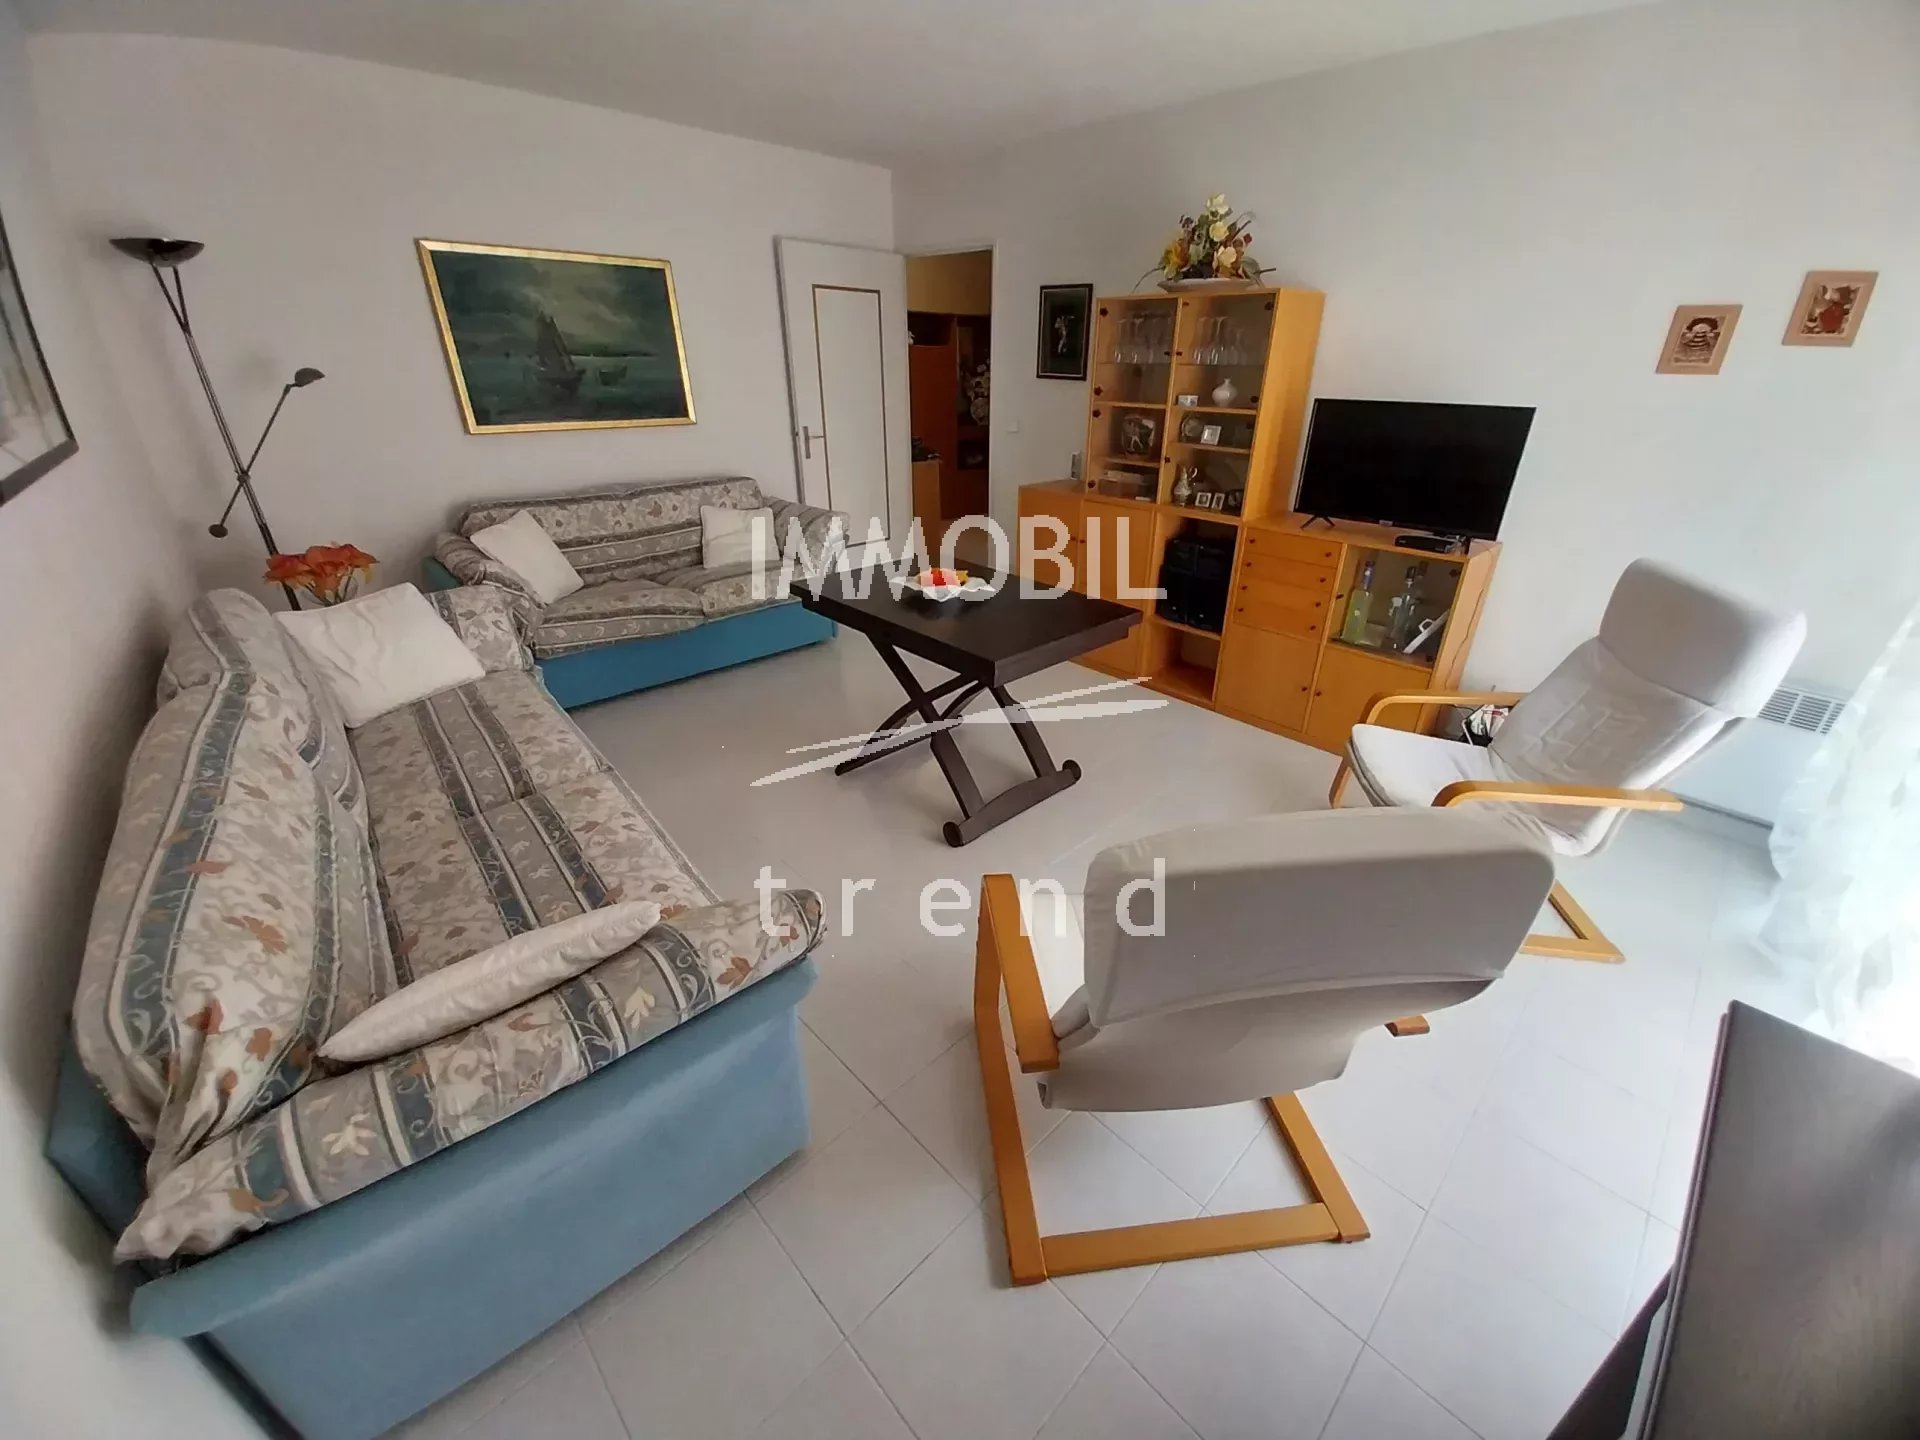 SOLE AGENT - MENTON TOWN CENTER - large one bedroom apartment  with balconies